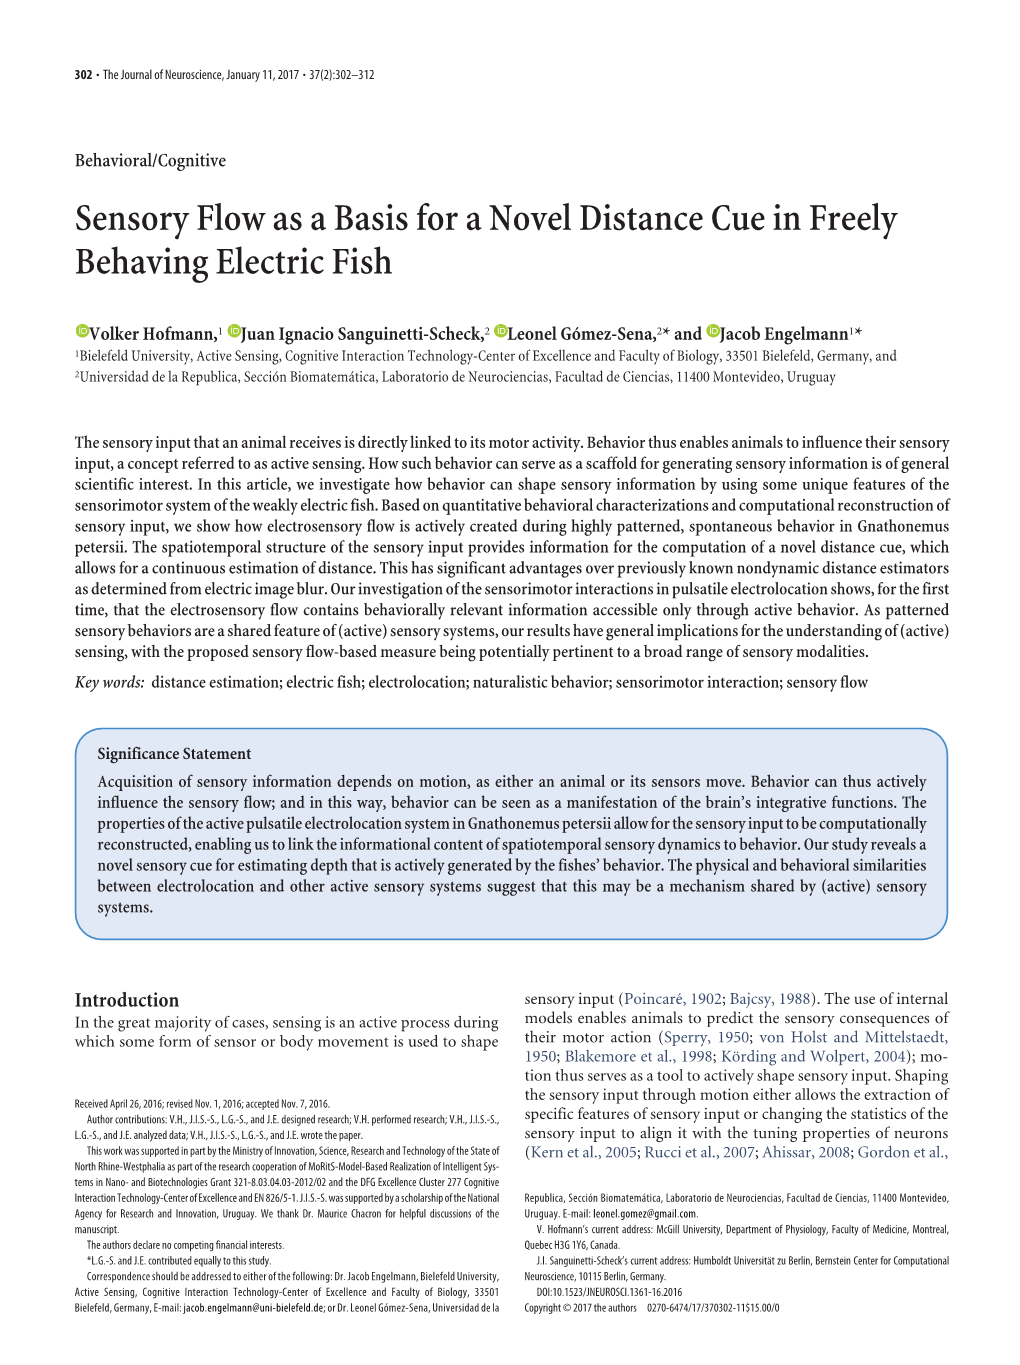 Sensory Flow As a Basis for a Novel Distance Cue in Freely Behaving Electric Fish